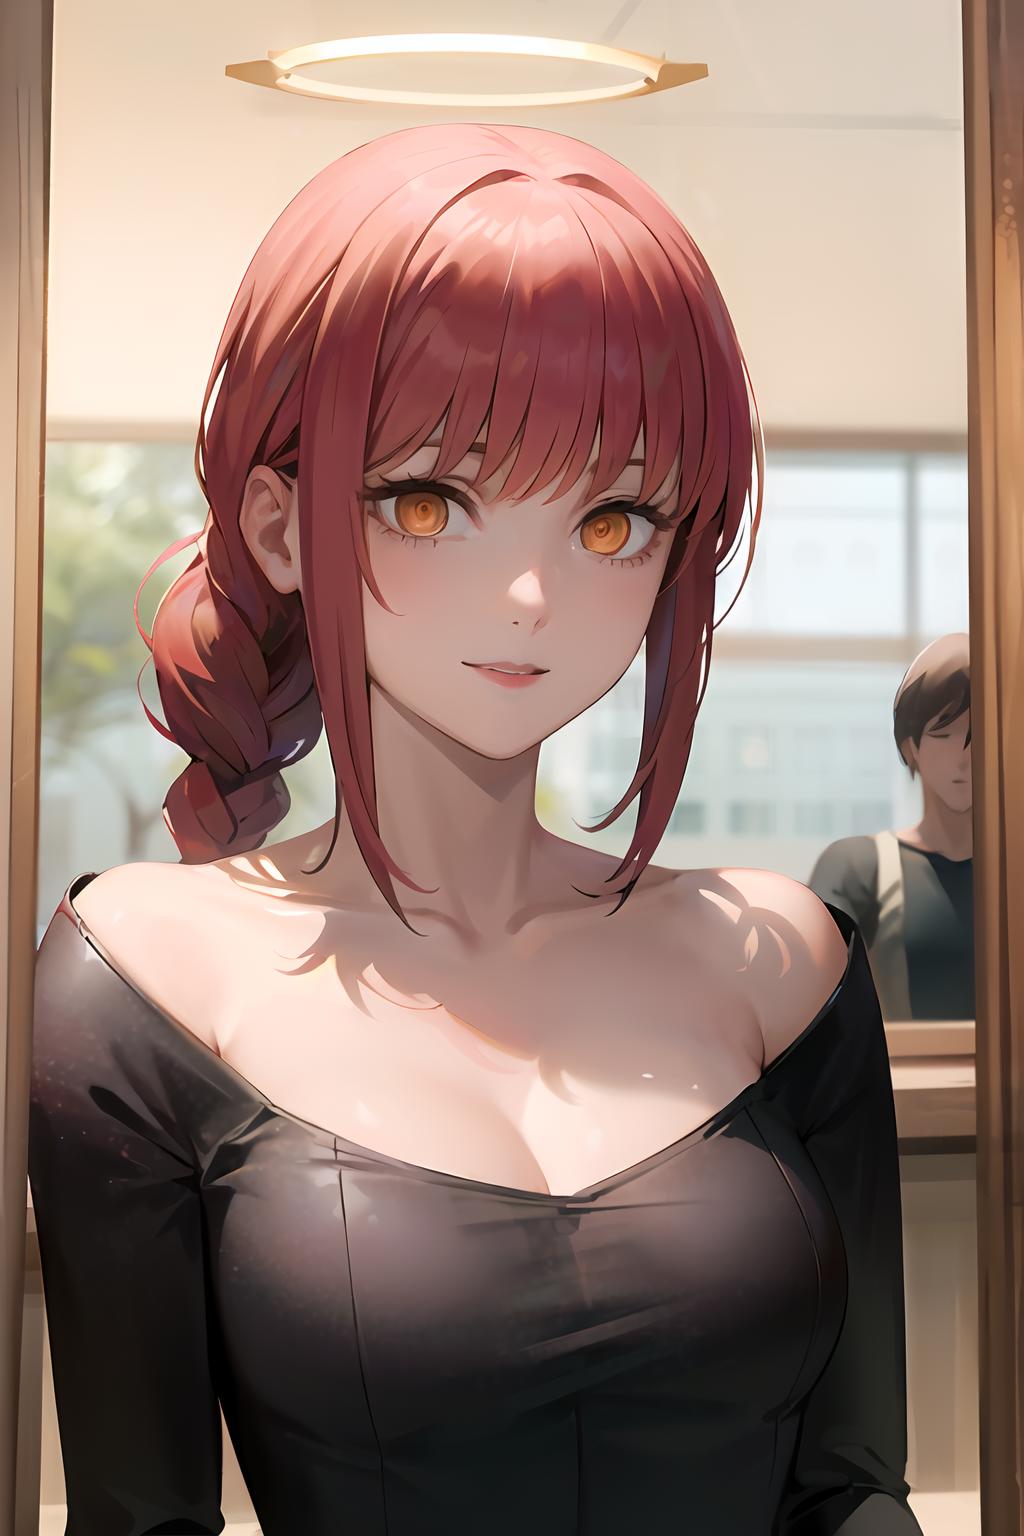 A red-haired anime girl wearing a black dress and looking at the camera.